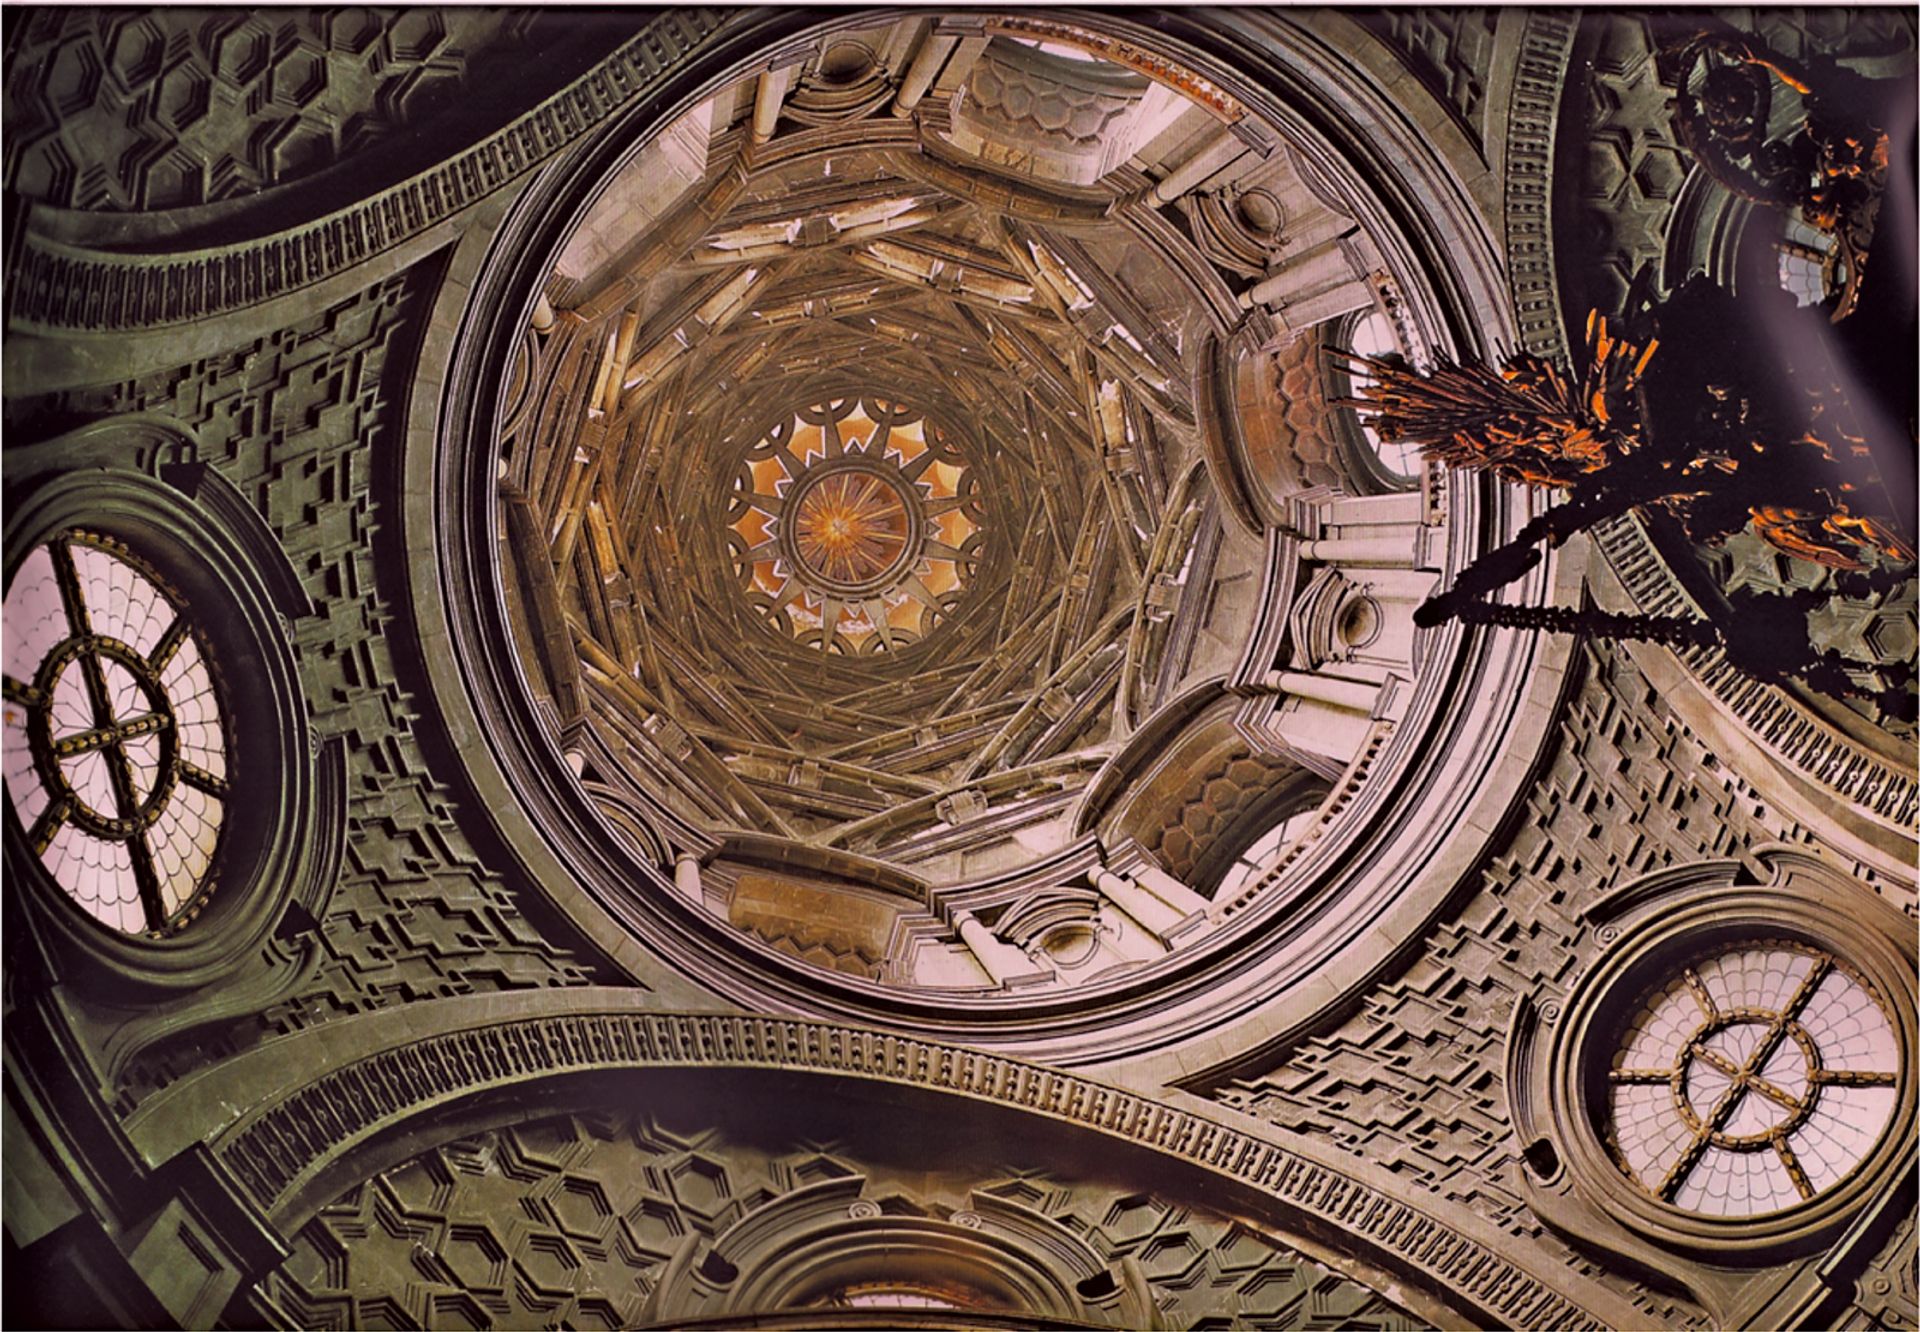 Guarino Guarini’s dome is extraordinarily complex, standing without support 